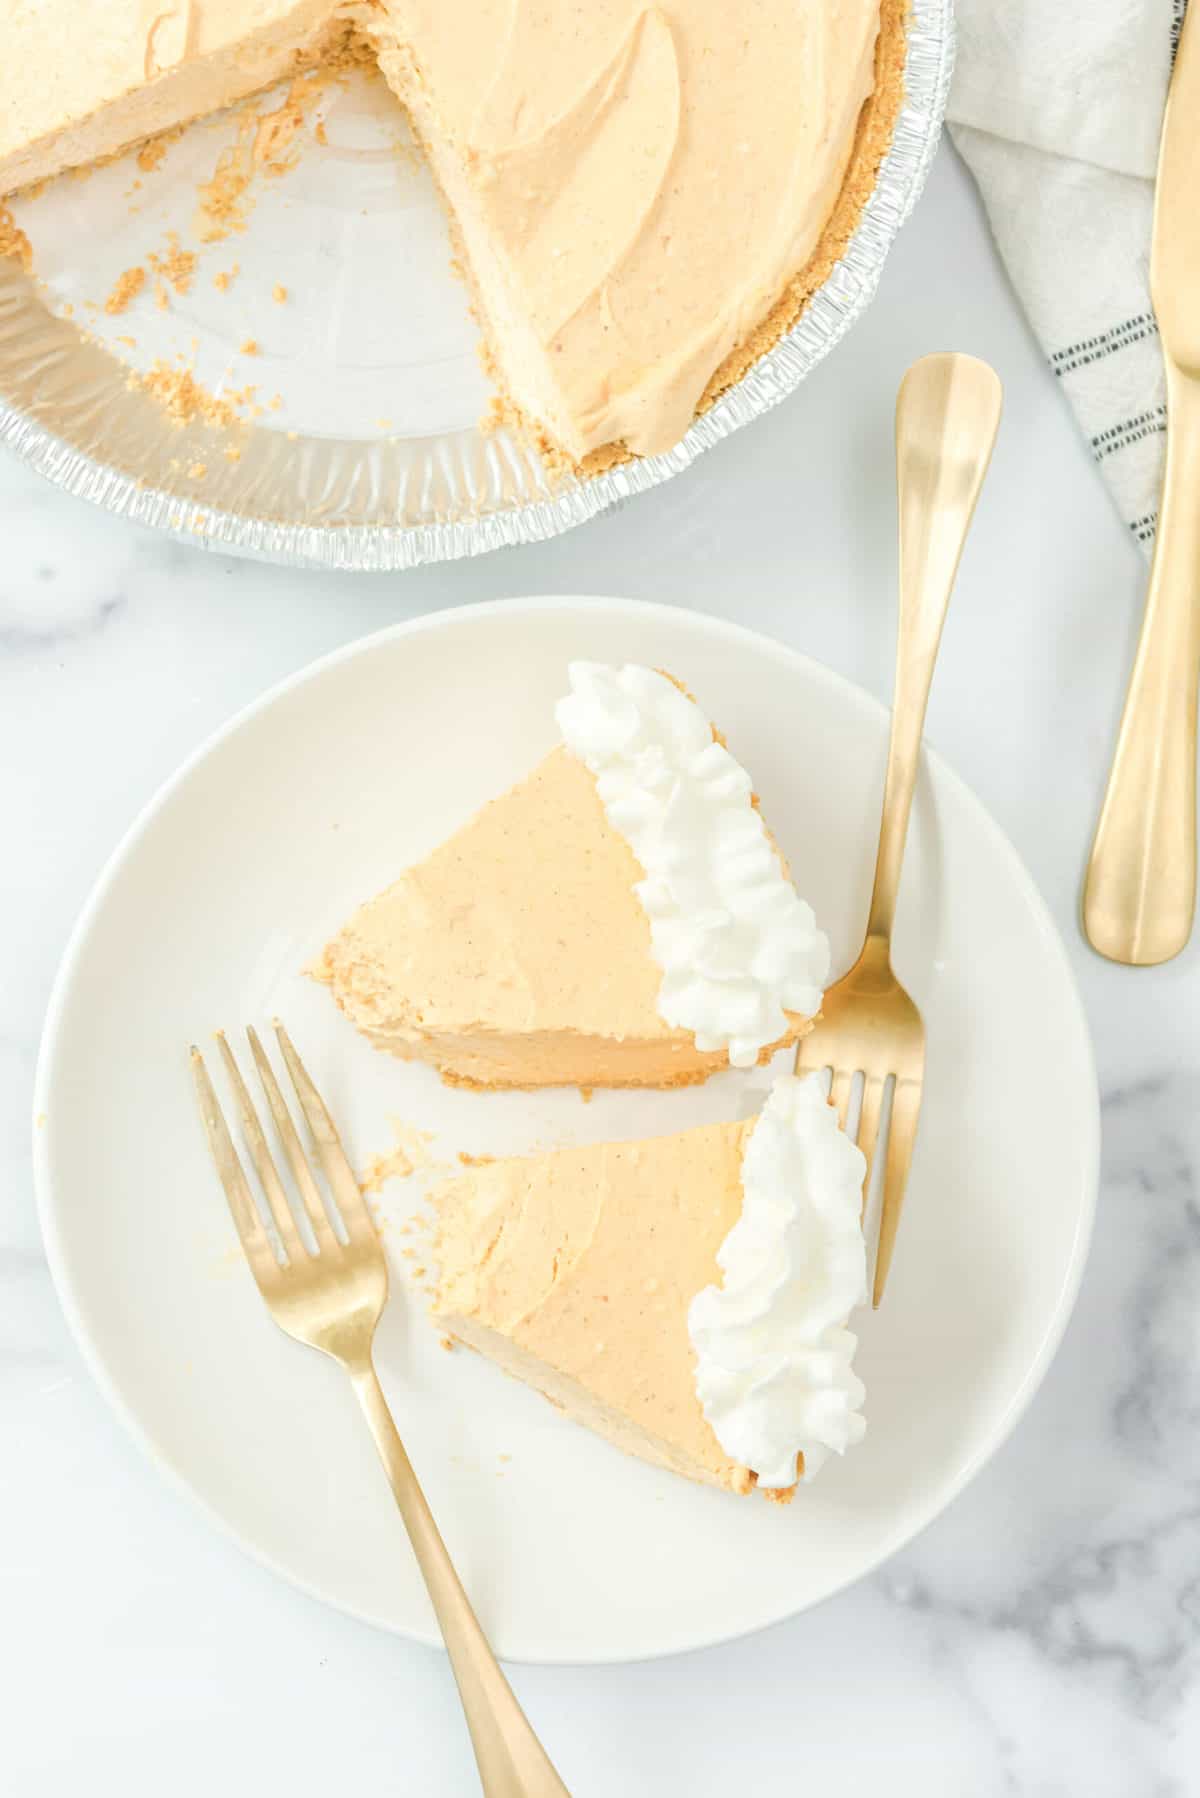 Two slices of no-bake pumpkin cheesecake on plate.